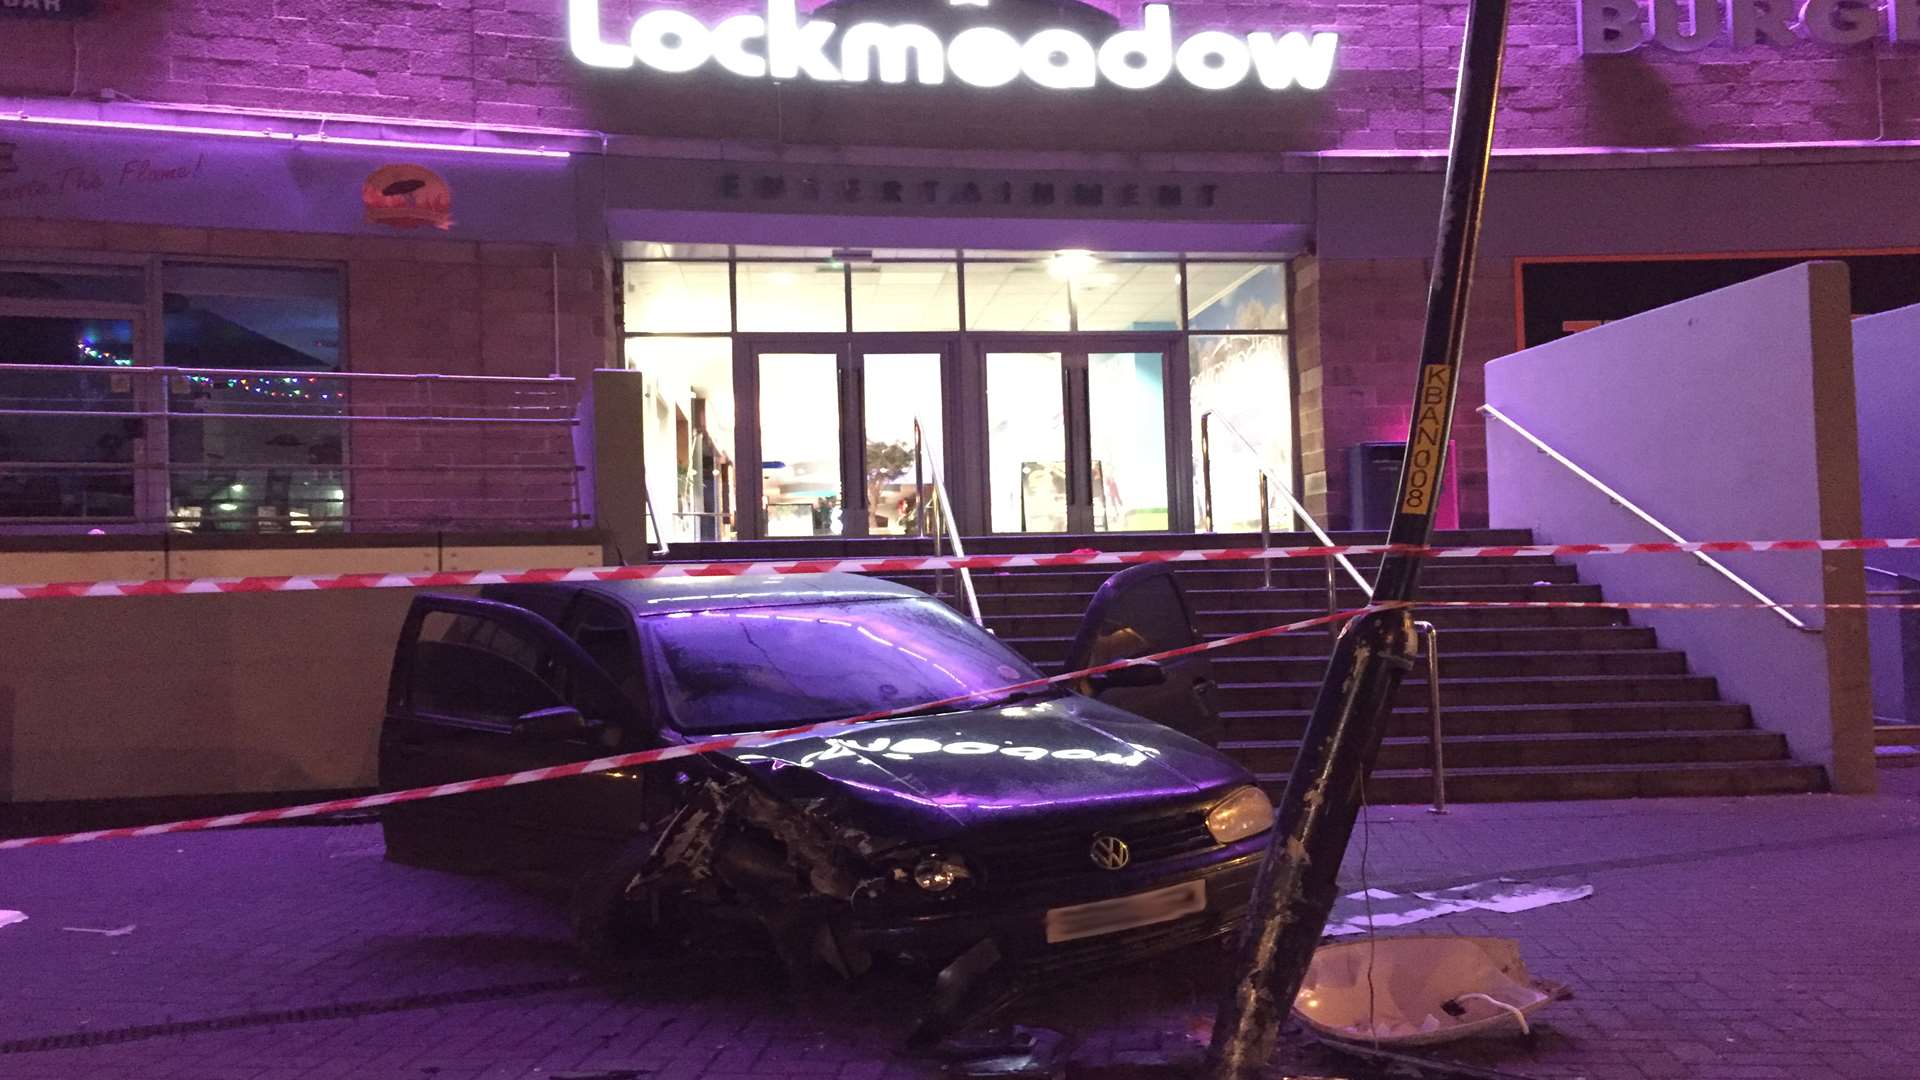 A car which smashed into a lamp post near the steps of the Lockmeadow complex